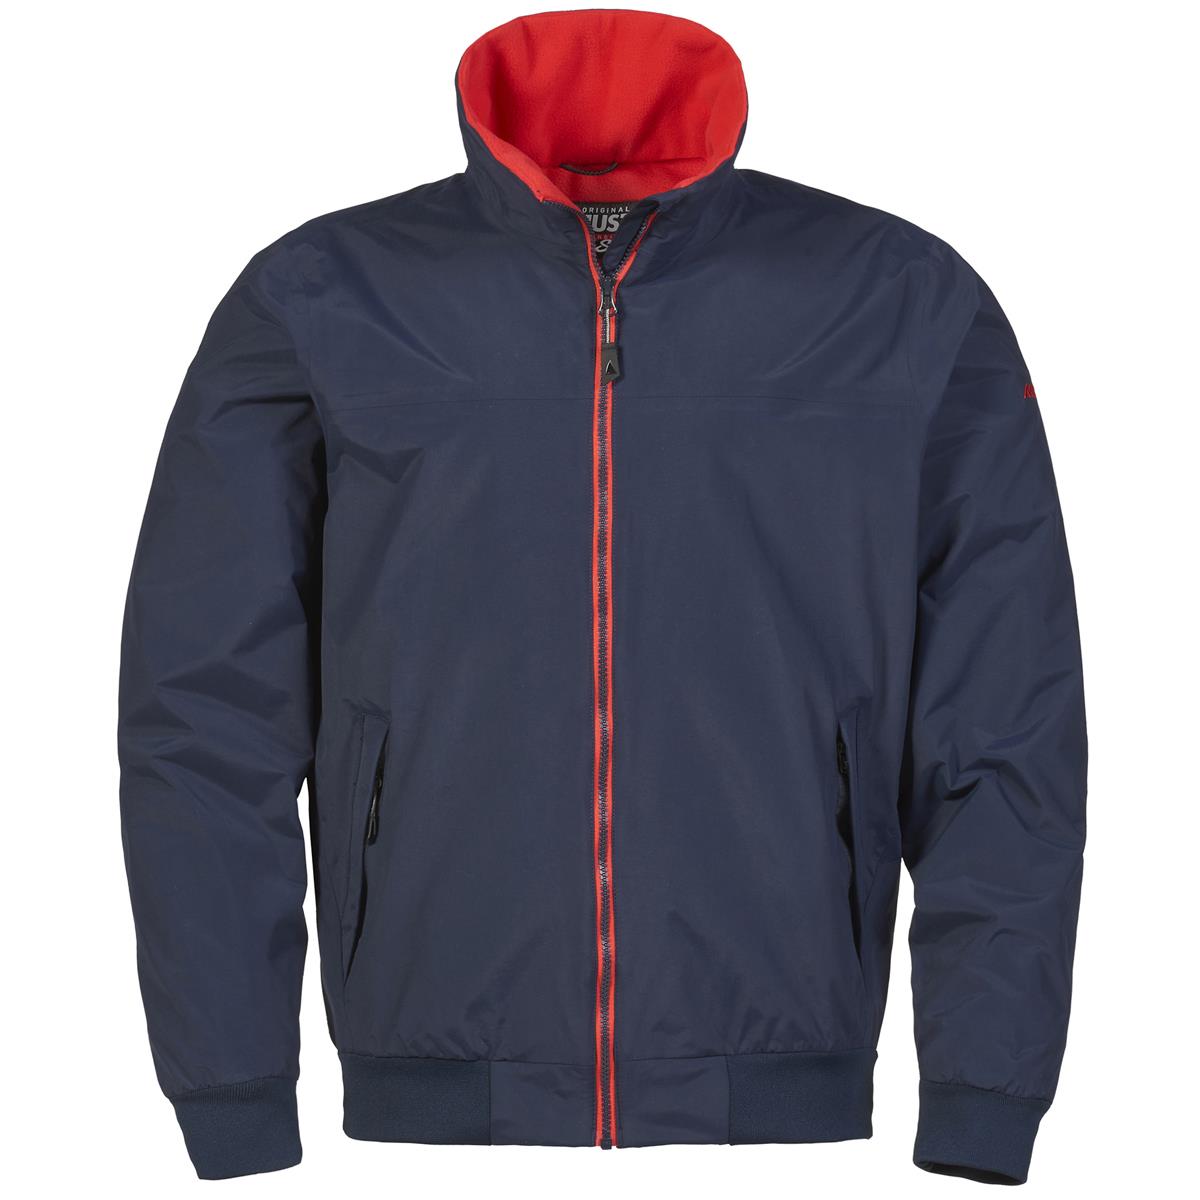 What practical features does the Musto Snug Blouson Jacket 2.0 have?